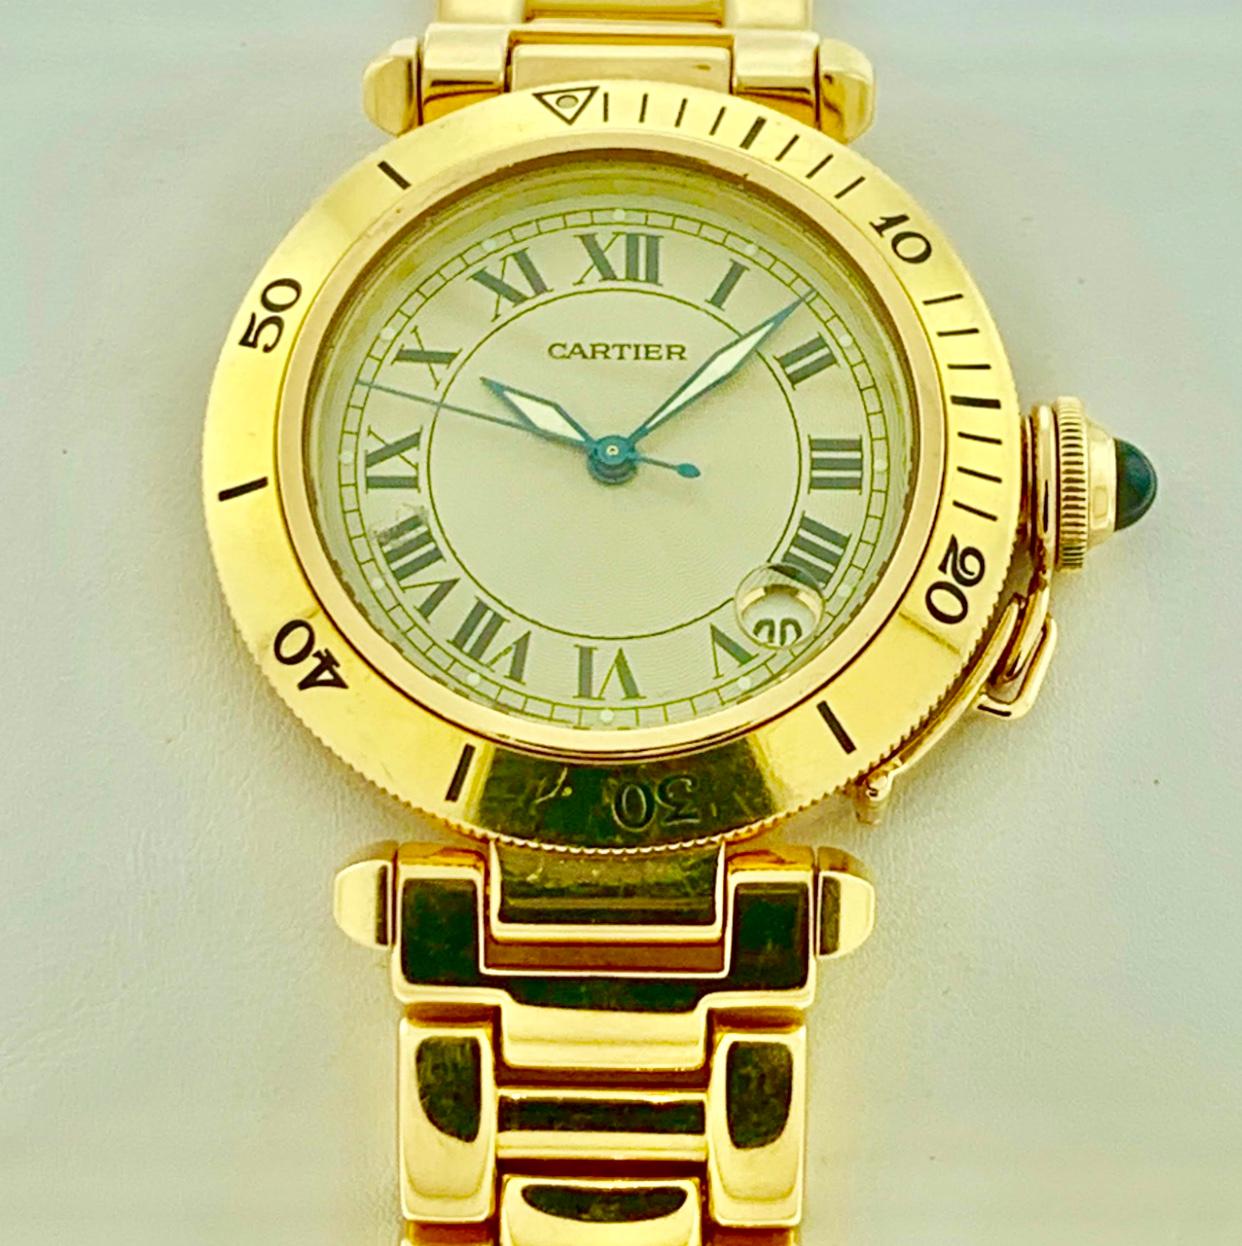 150 Gm 18 Karat Solid Yellow Gold Cartier Pasha Automatic Watch Water Resistant 10